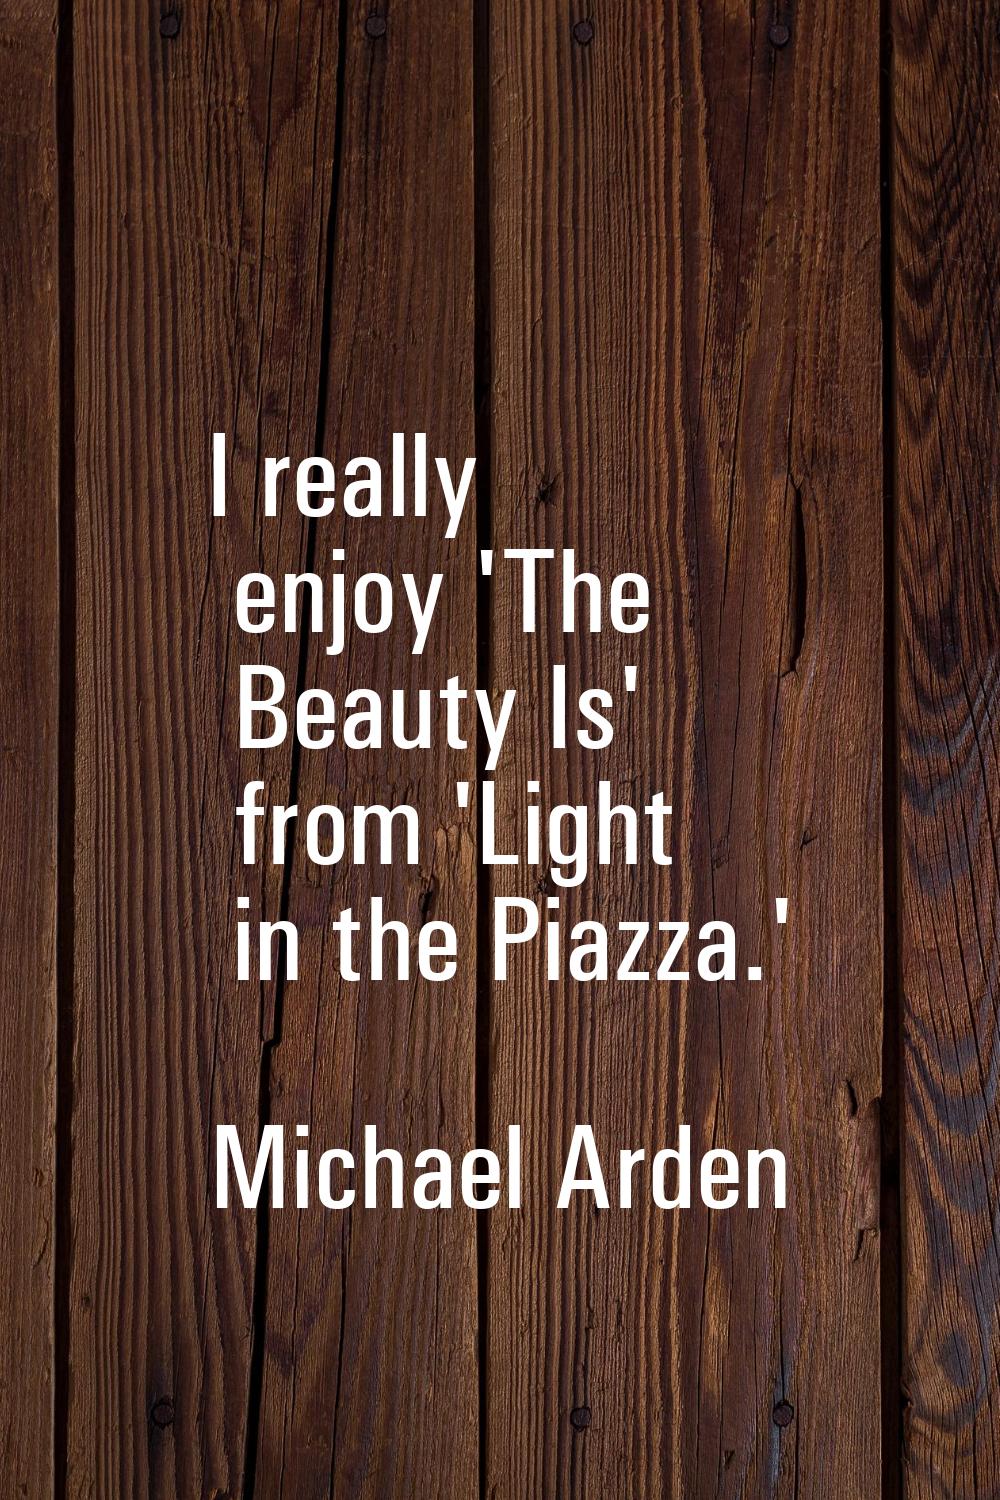 I really enjoy 'The Beauty Is' from 'Light in the Piazza.'